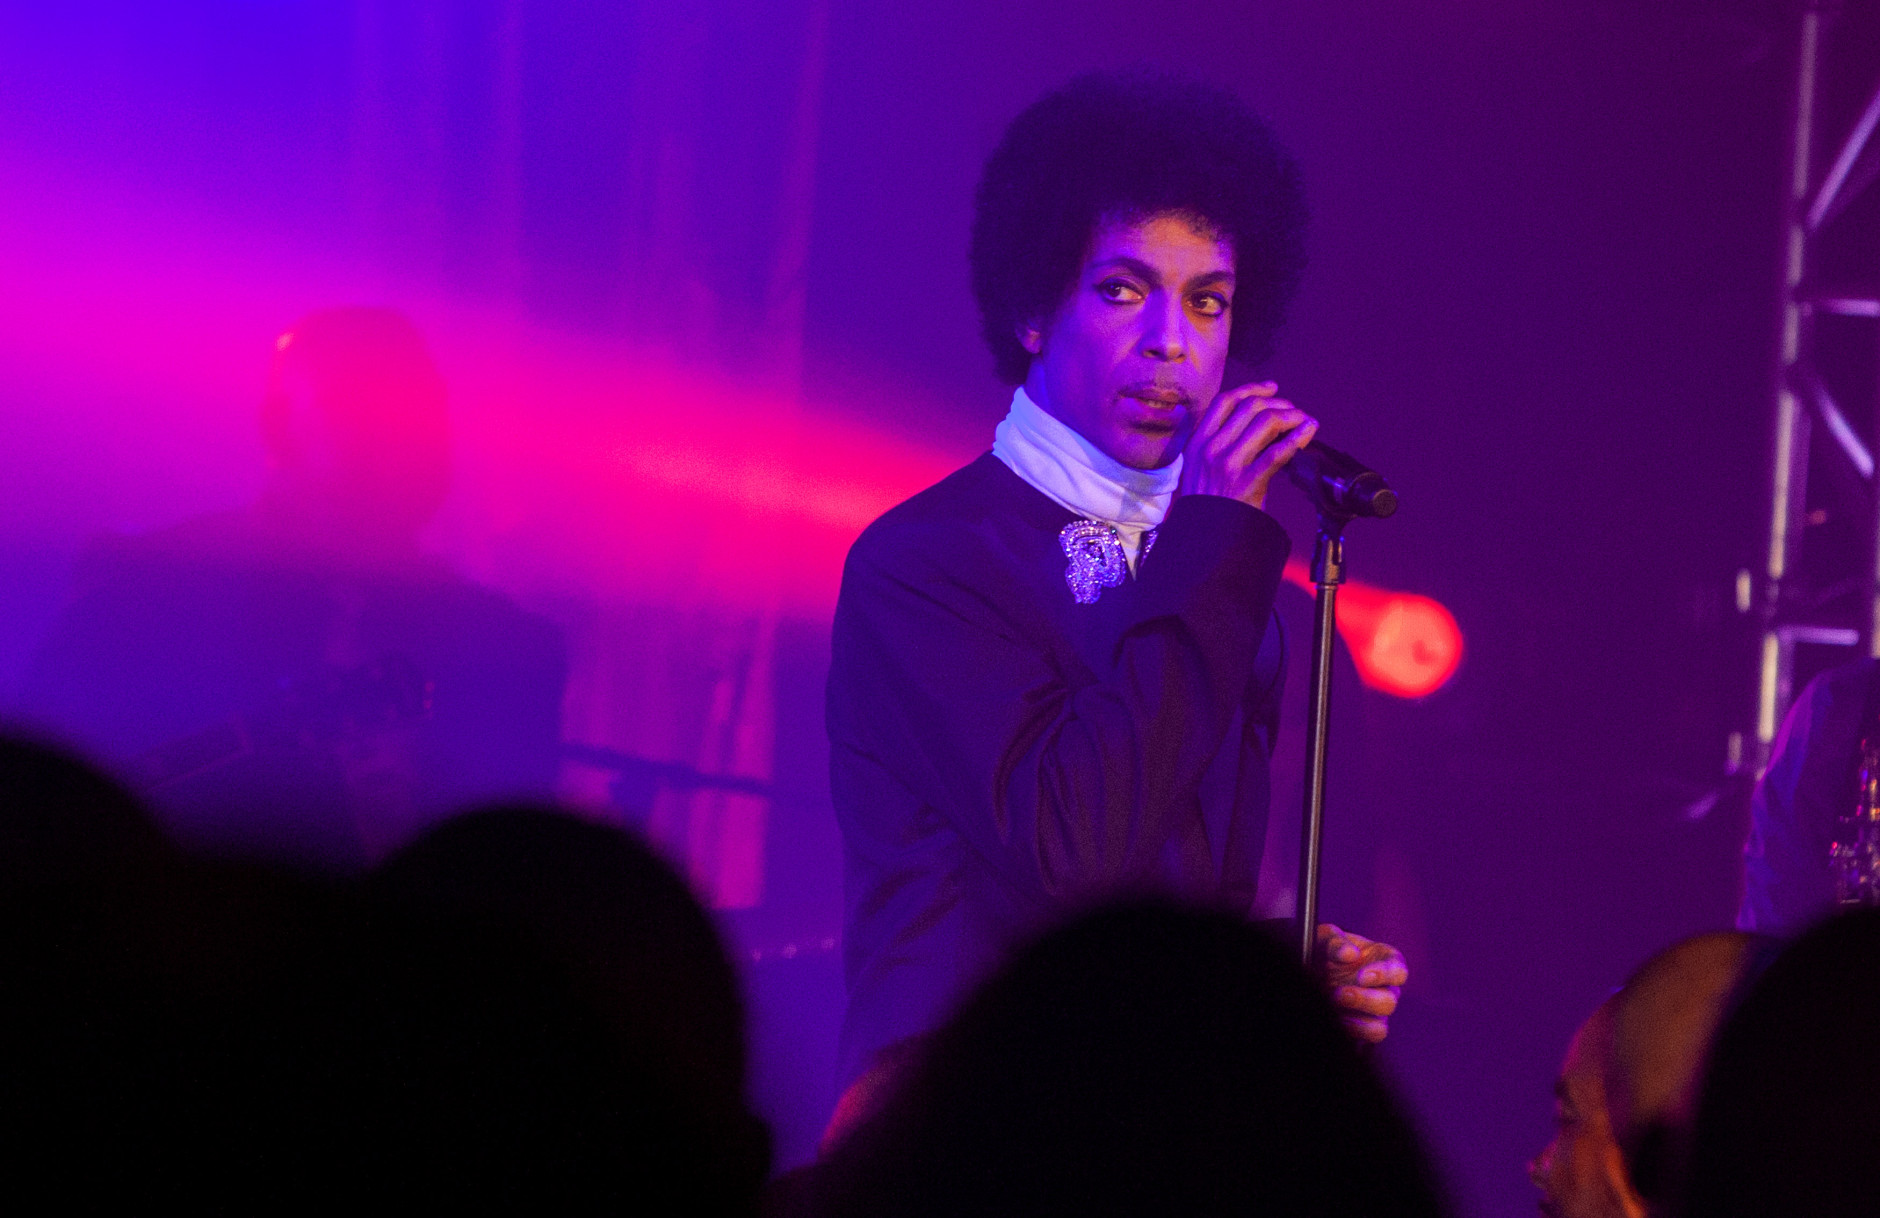 Prince and his band is the surprised musical guest during the George Lucas and Mellody Hobson's wedding reception at Promontory Point on Saturday, June 29, 2013 in Chicago. (Photo by Barry Brecheisen/Invision/AP)